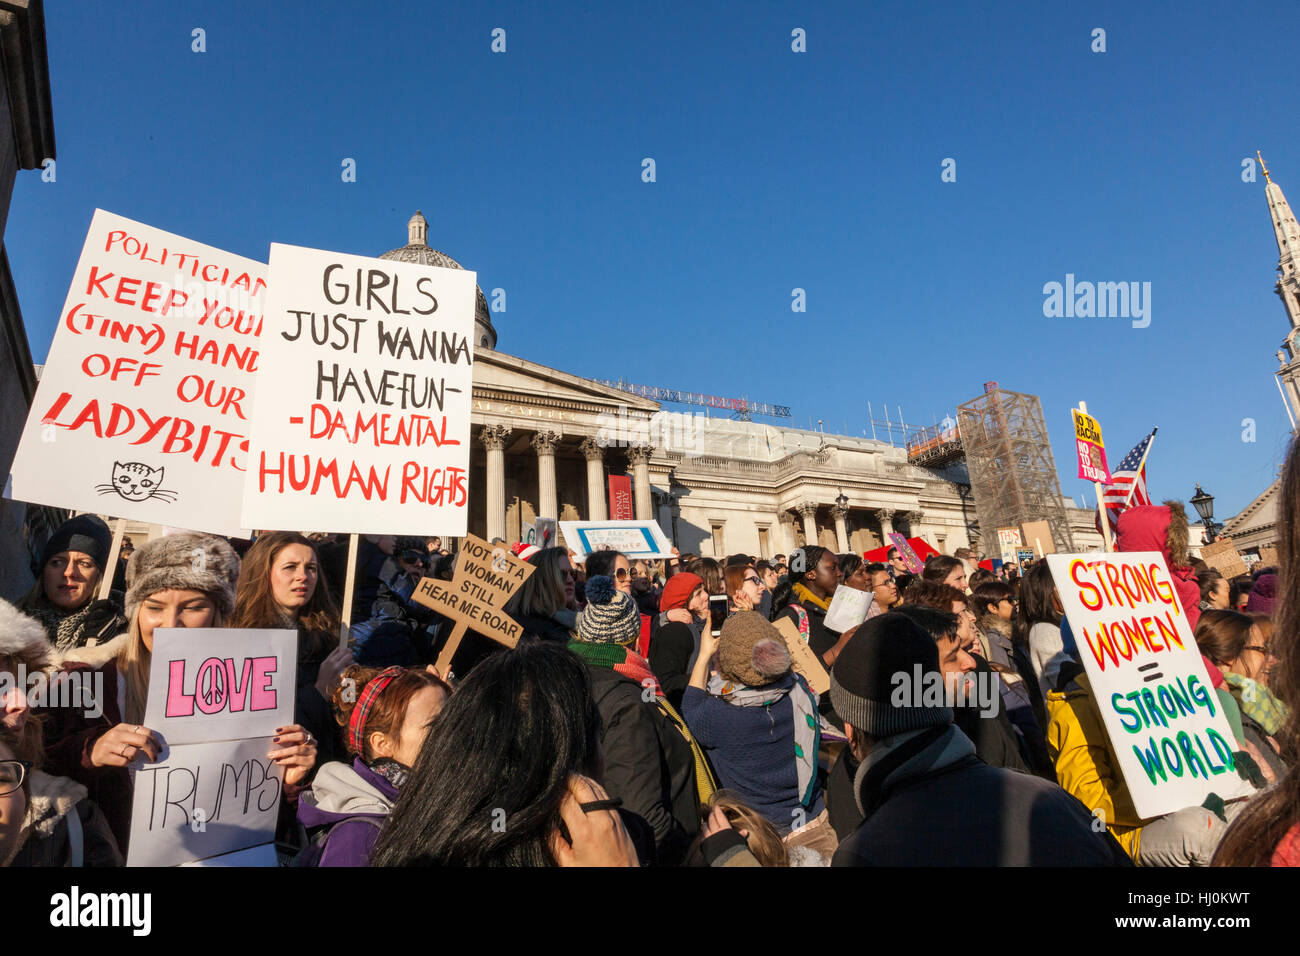 London, United Kingdom, 21st January 2017: Following Donald Trump's inauguration on 20th January, 100,000 protesters have marched in London to express their opposition to his controversial presidency. Demonstrators walked from the American Embassy in Grosvenor Square, to Trafalgar Square, and the Women's March on London was one of hundreds of protests taking place in major cities around the world on Saturday. Credit: galit seligmann/Alamy Live News Stock Photo